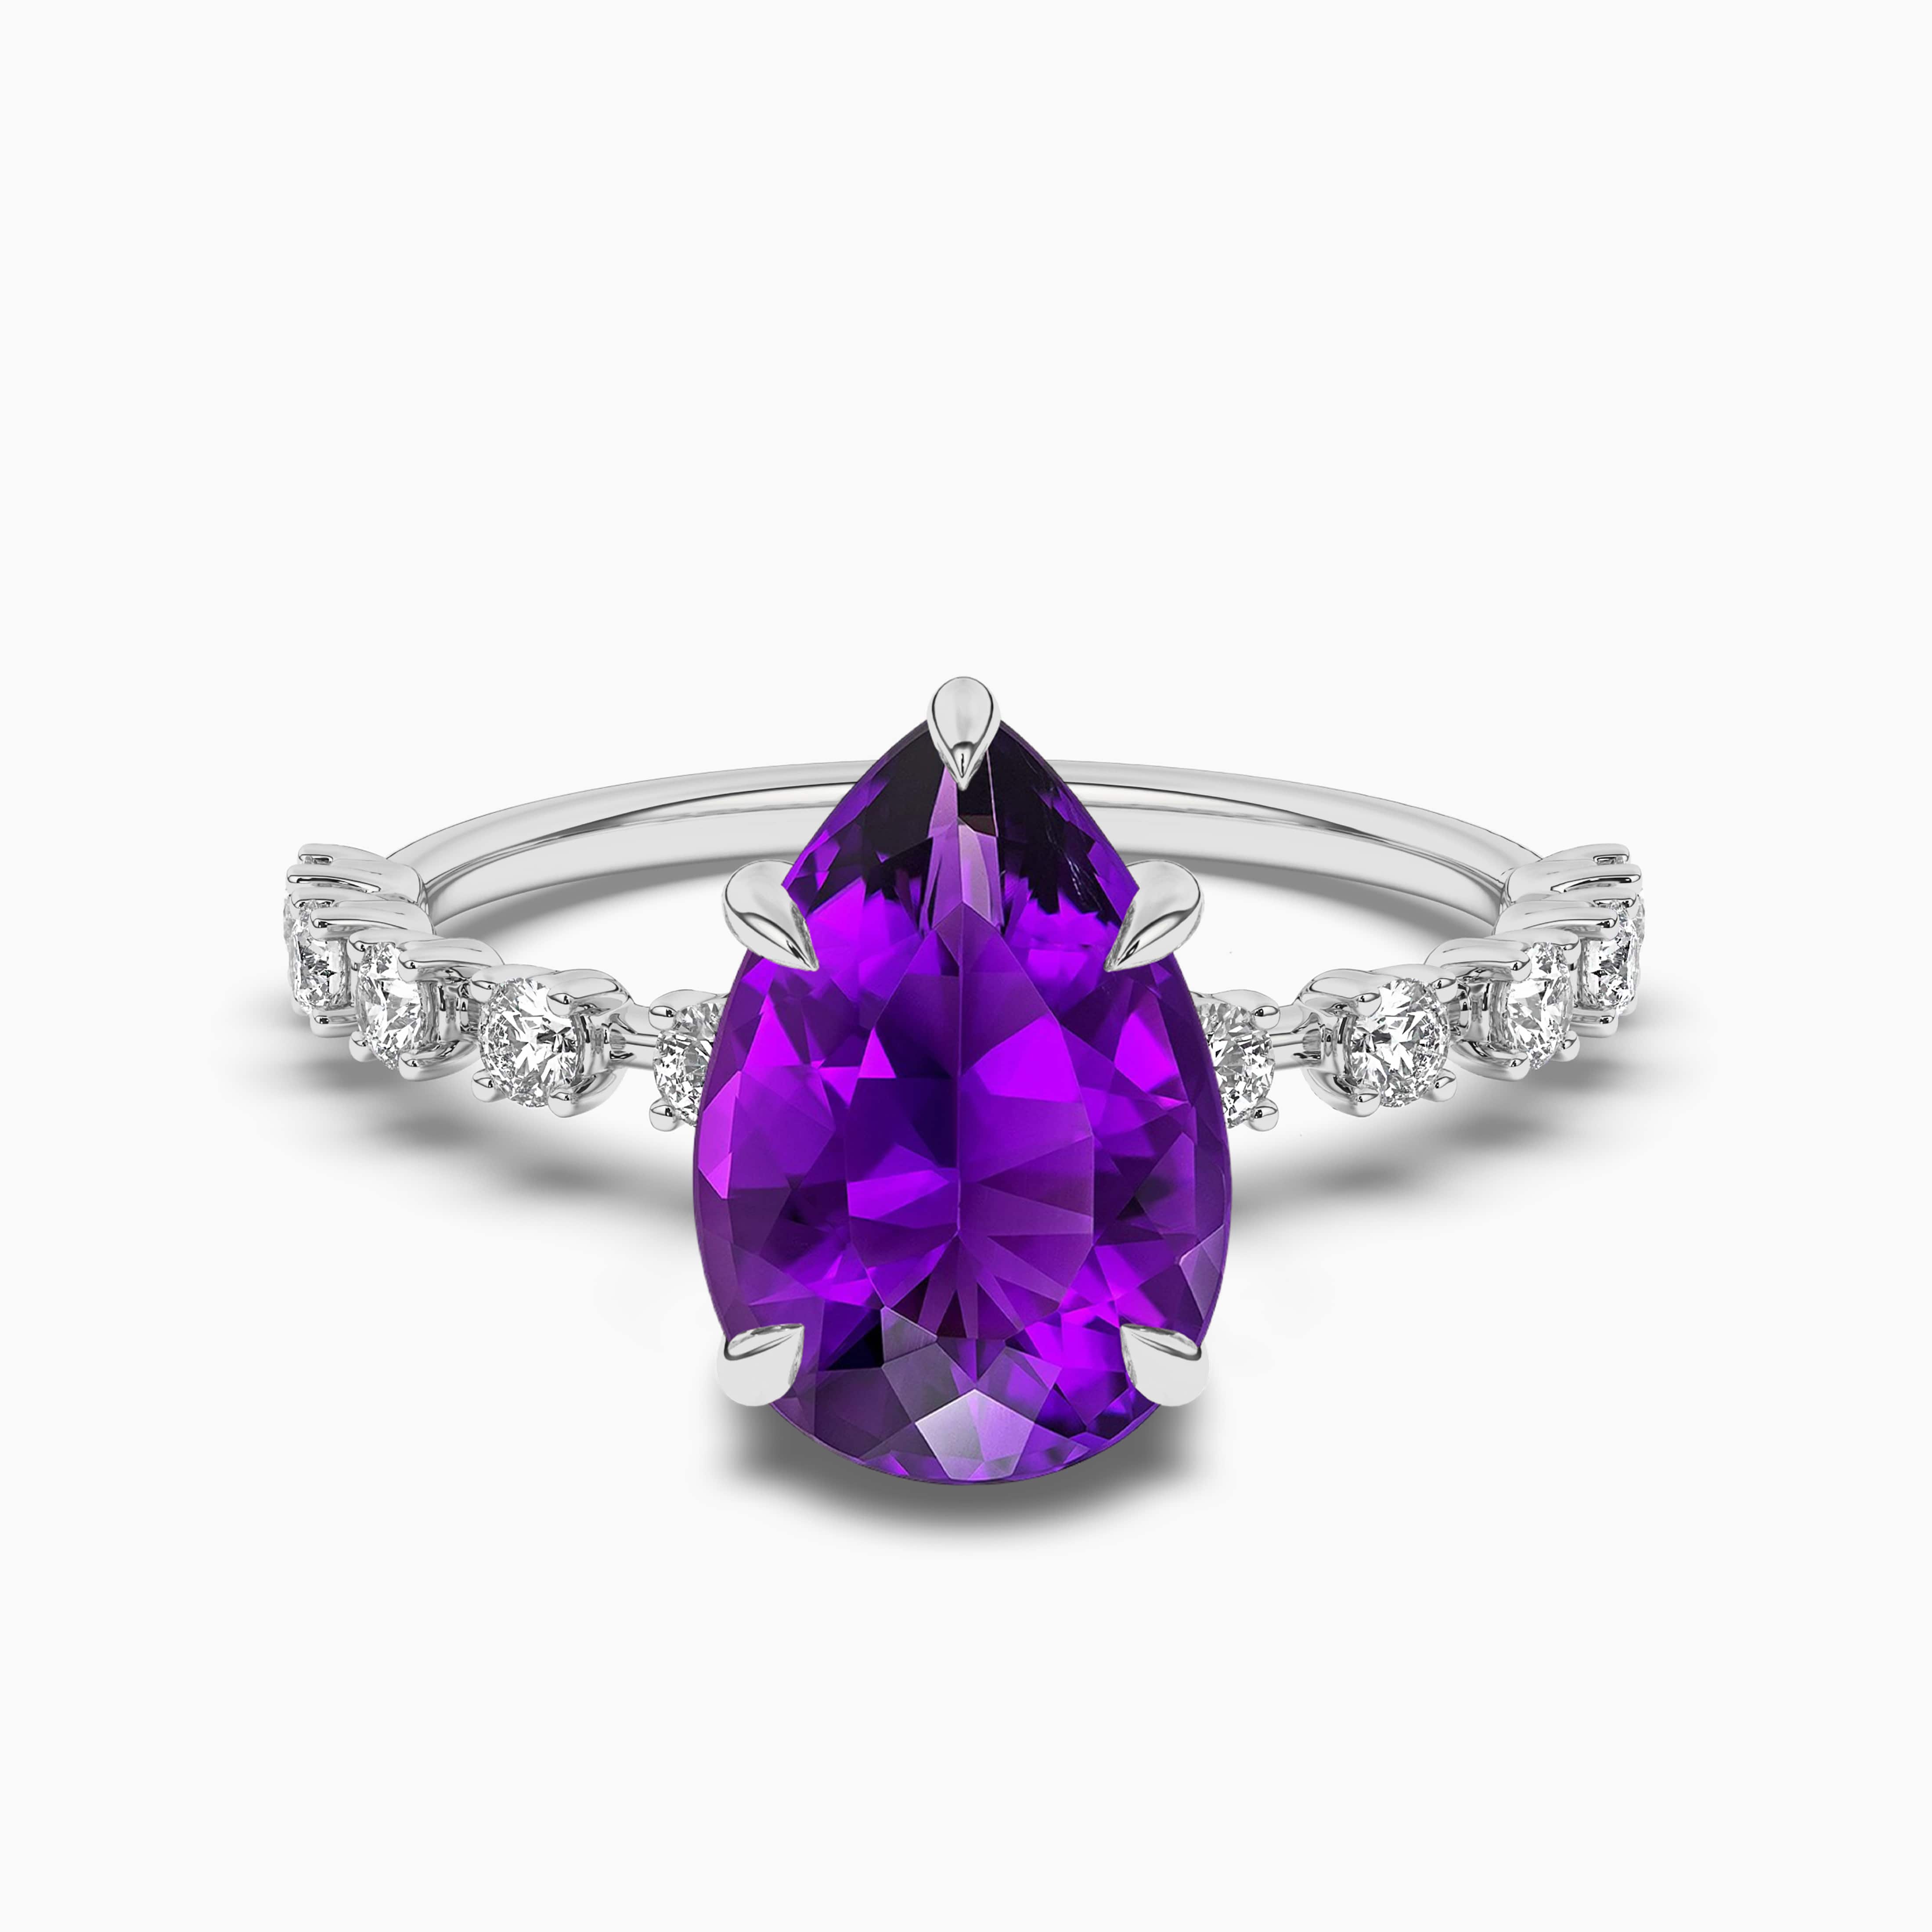 Pear Shaped Amethyst Engagement Ring White Gold 